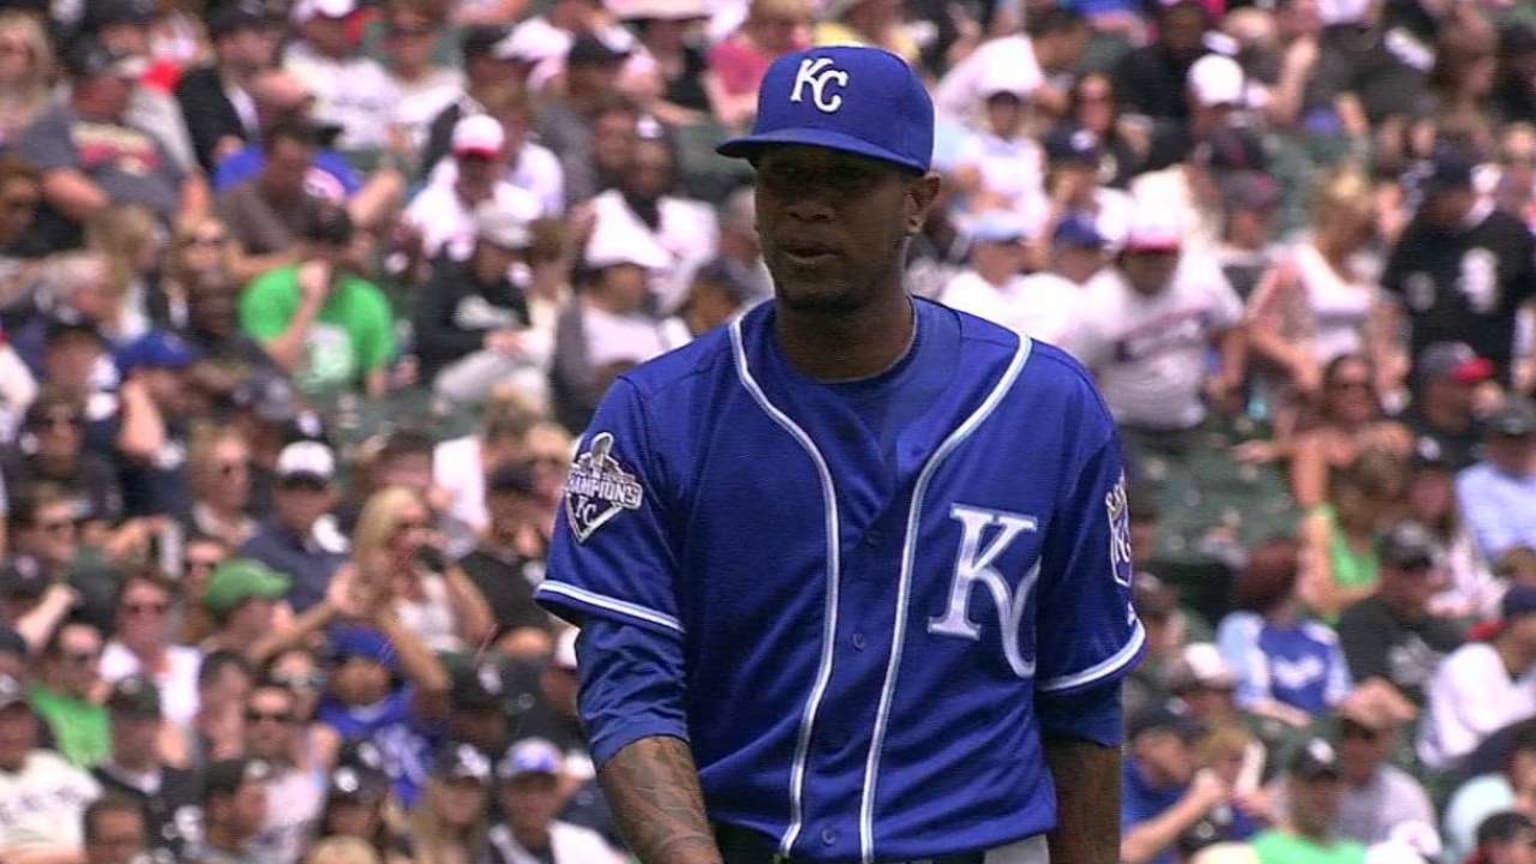 Royals pitcher Yordano Ventura may have been robbed as he lay